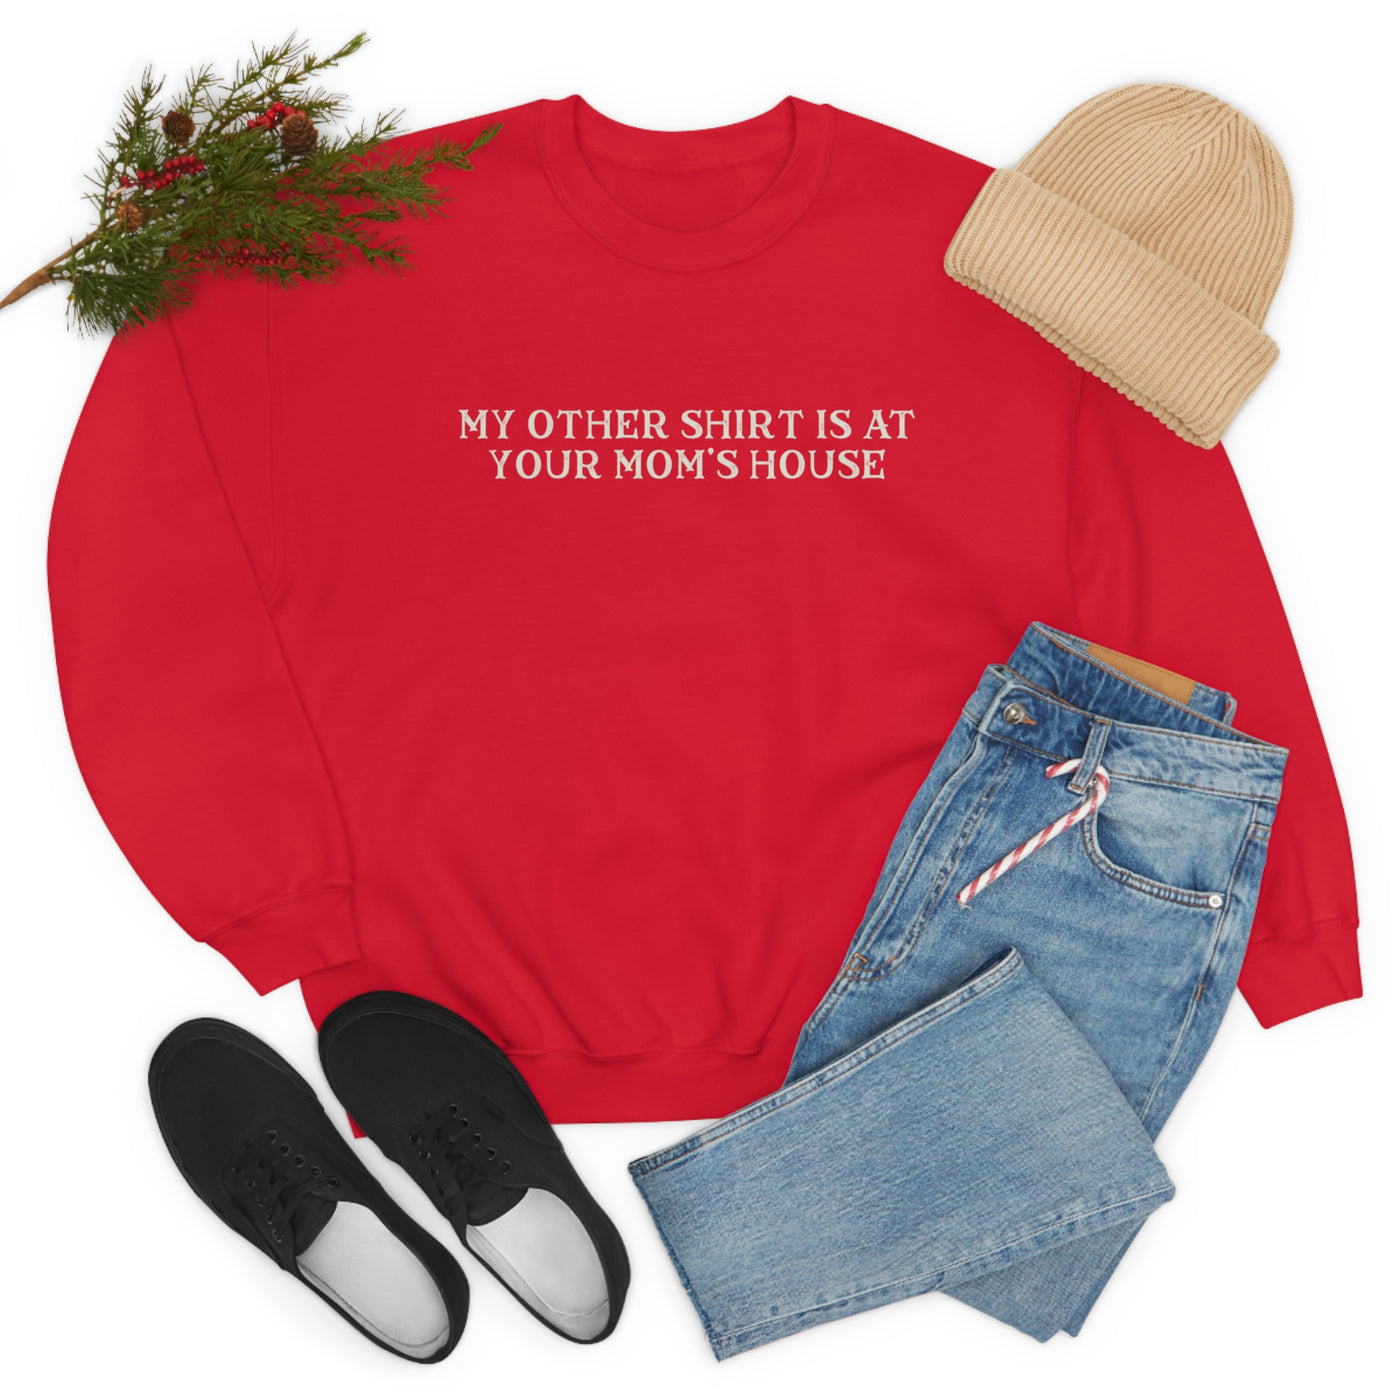 My Other Shirt Is At Your Mom's House Crewneck Sweatshirt